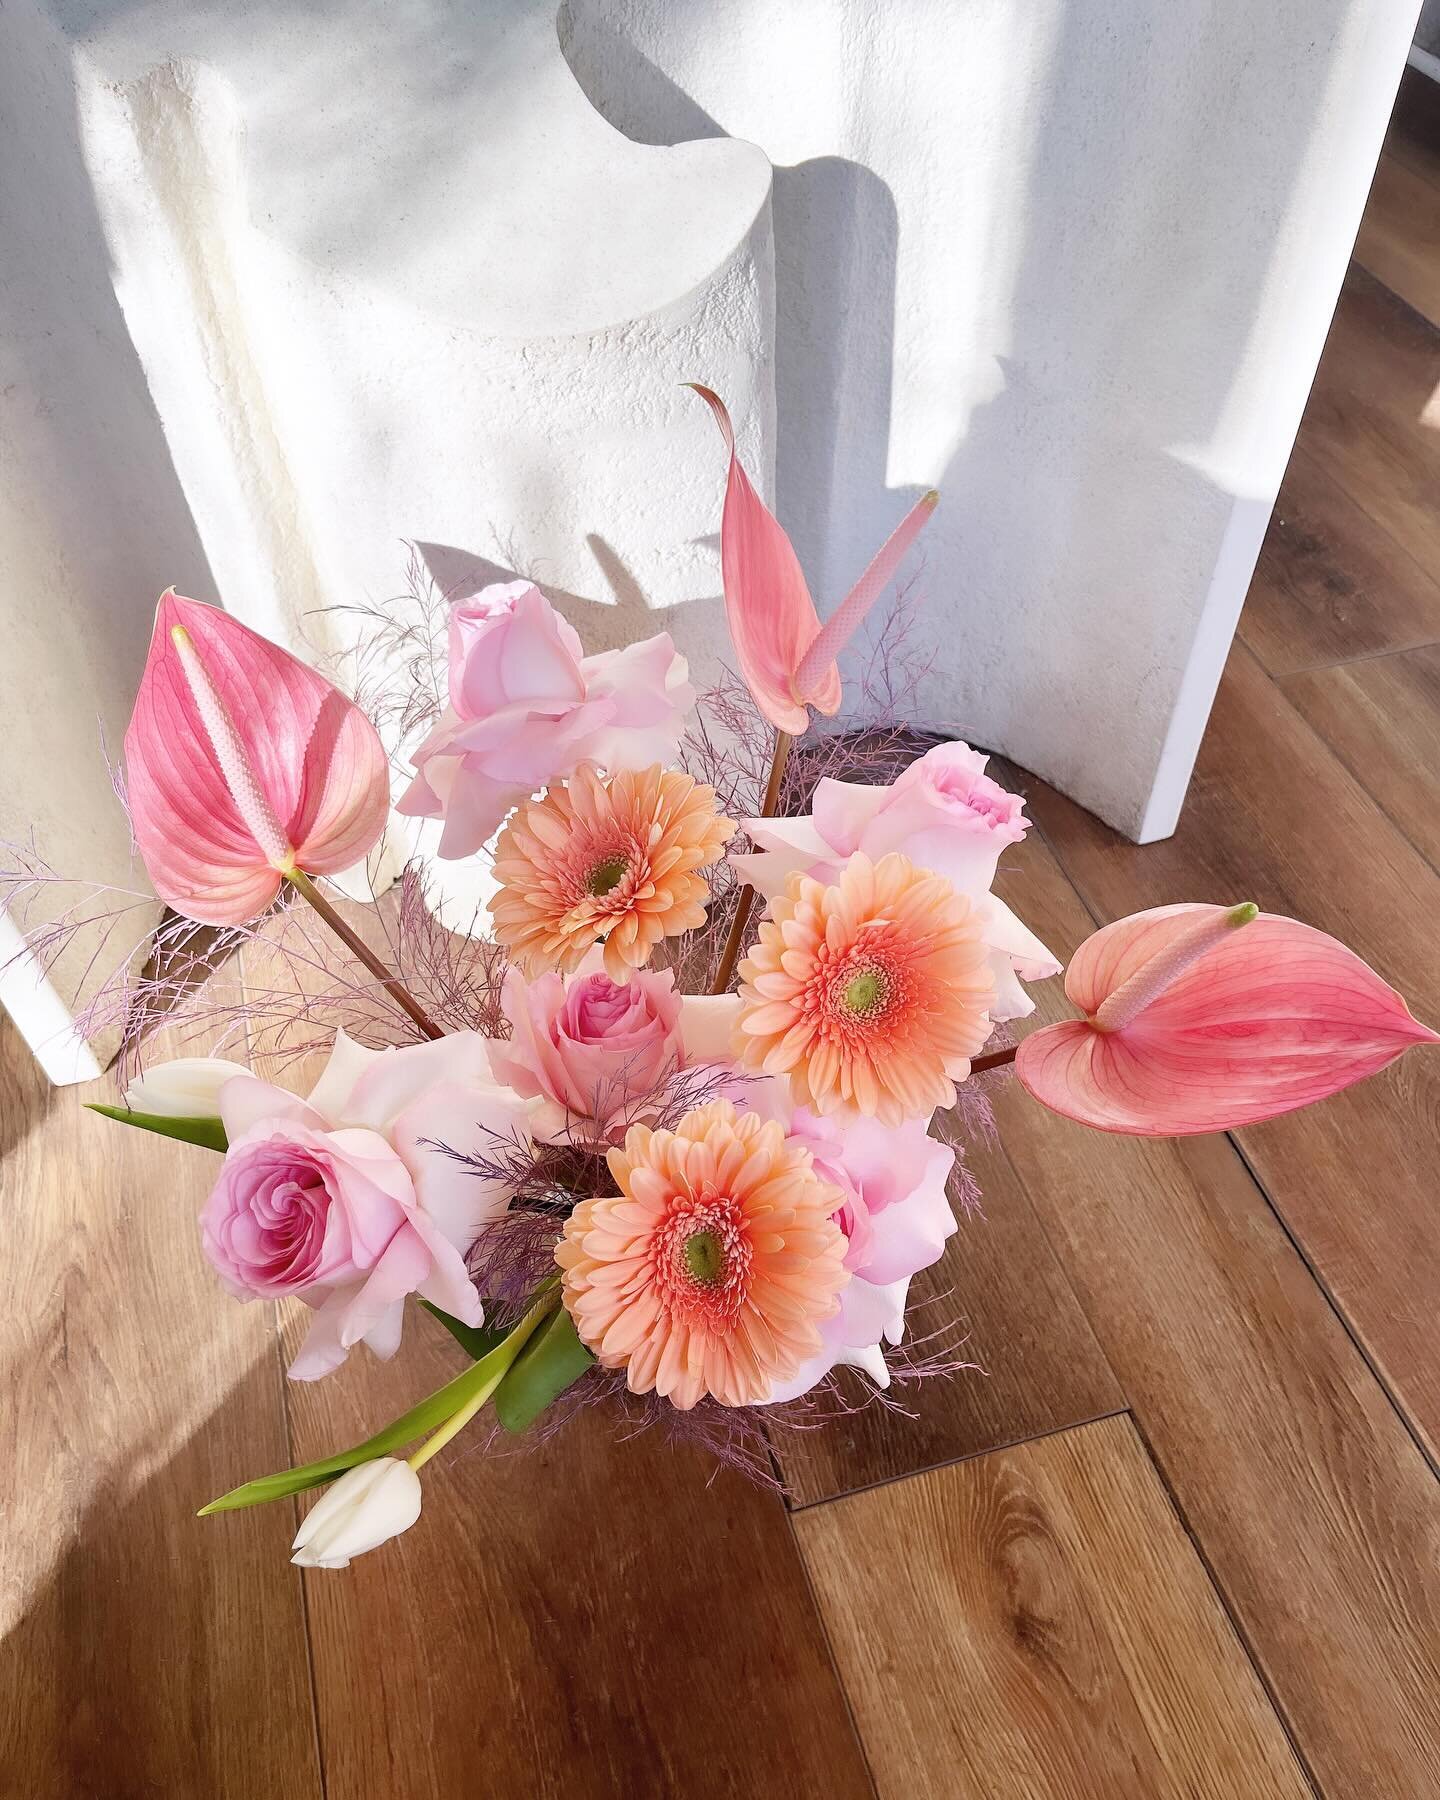 Sometimes we don&rsquo;t have the words&hellip;even for a fun occasion like a birthday or anniversary! 🎈🎈🎈

Flowers are like these delicate messengers articulating sentiments and emotions on our behalf.  Their colors, scents and varieties will spa